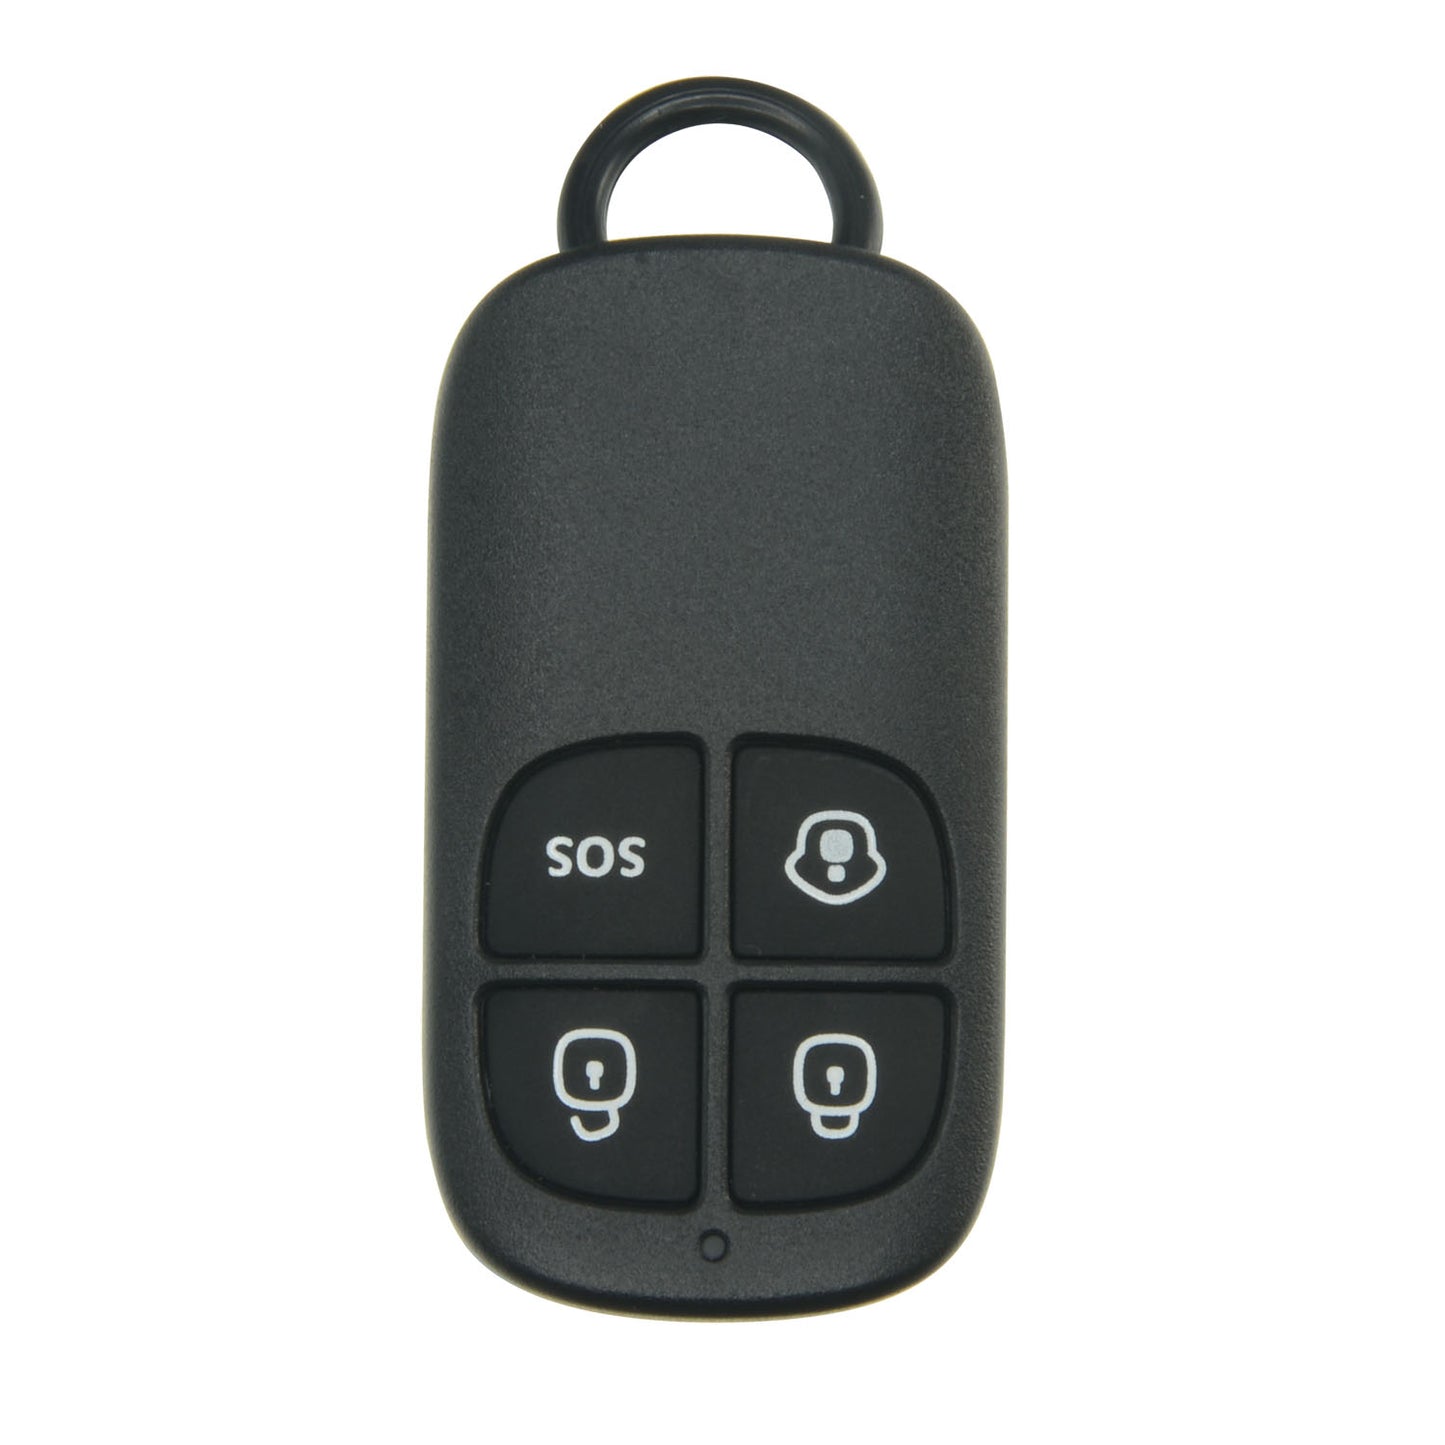 2 multifunction remote controls - Wireless - Armed, silent and partial arming - Not armed - SOS (anti-panic) button - LED indicator